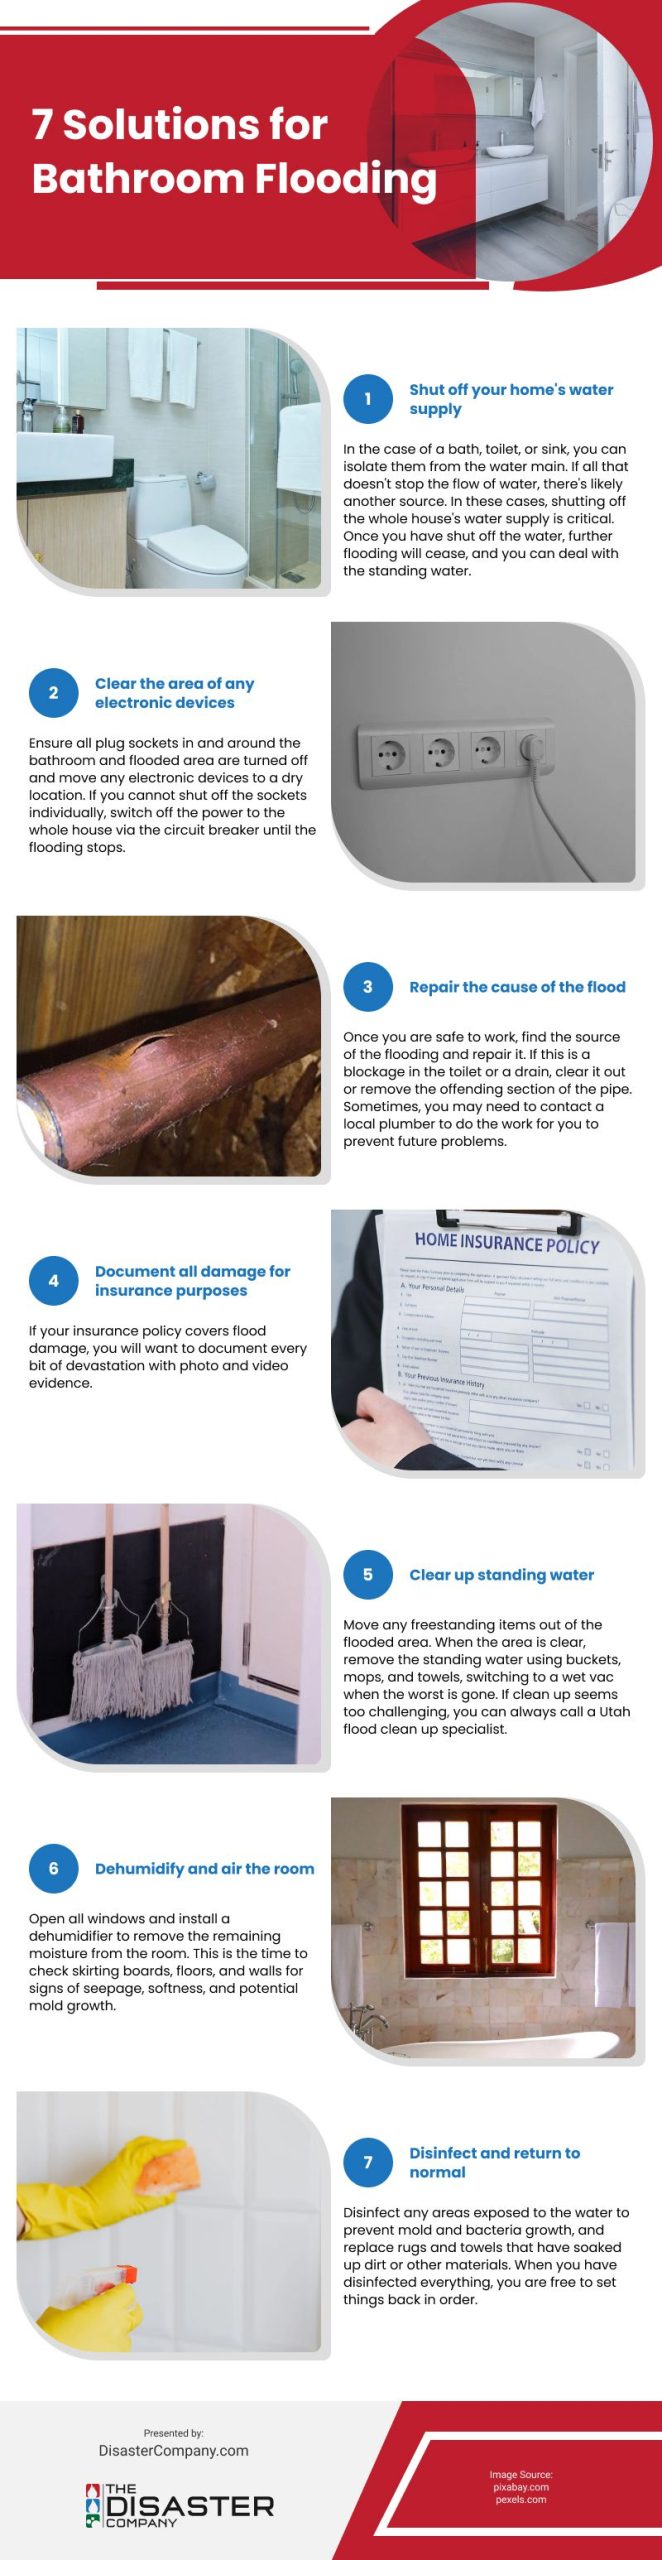 7 Solutions for Bathroom Flooding Infographic